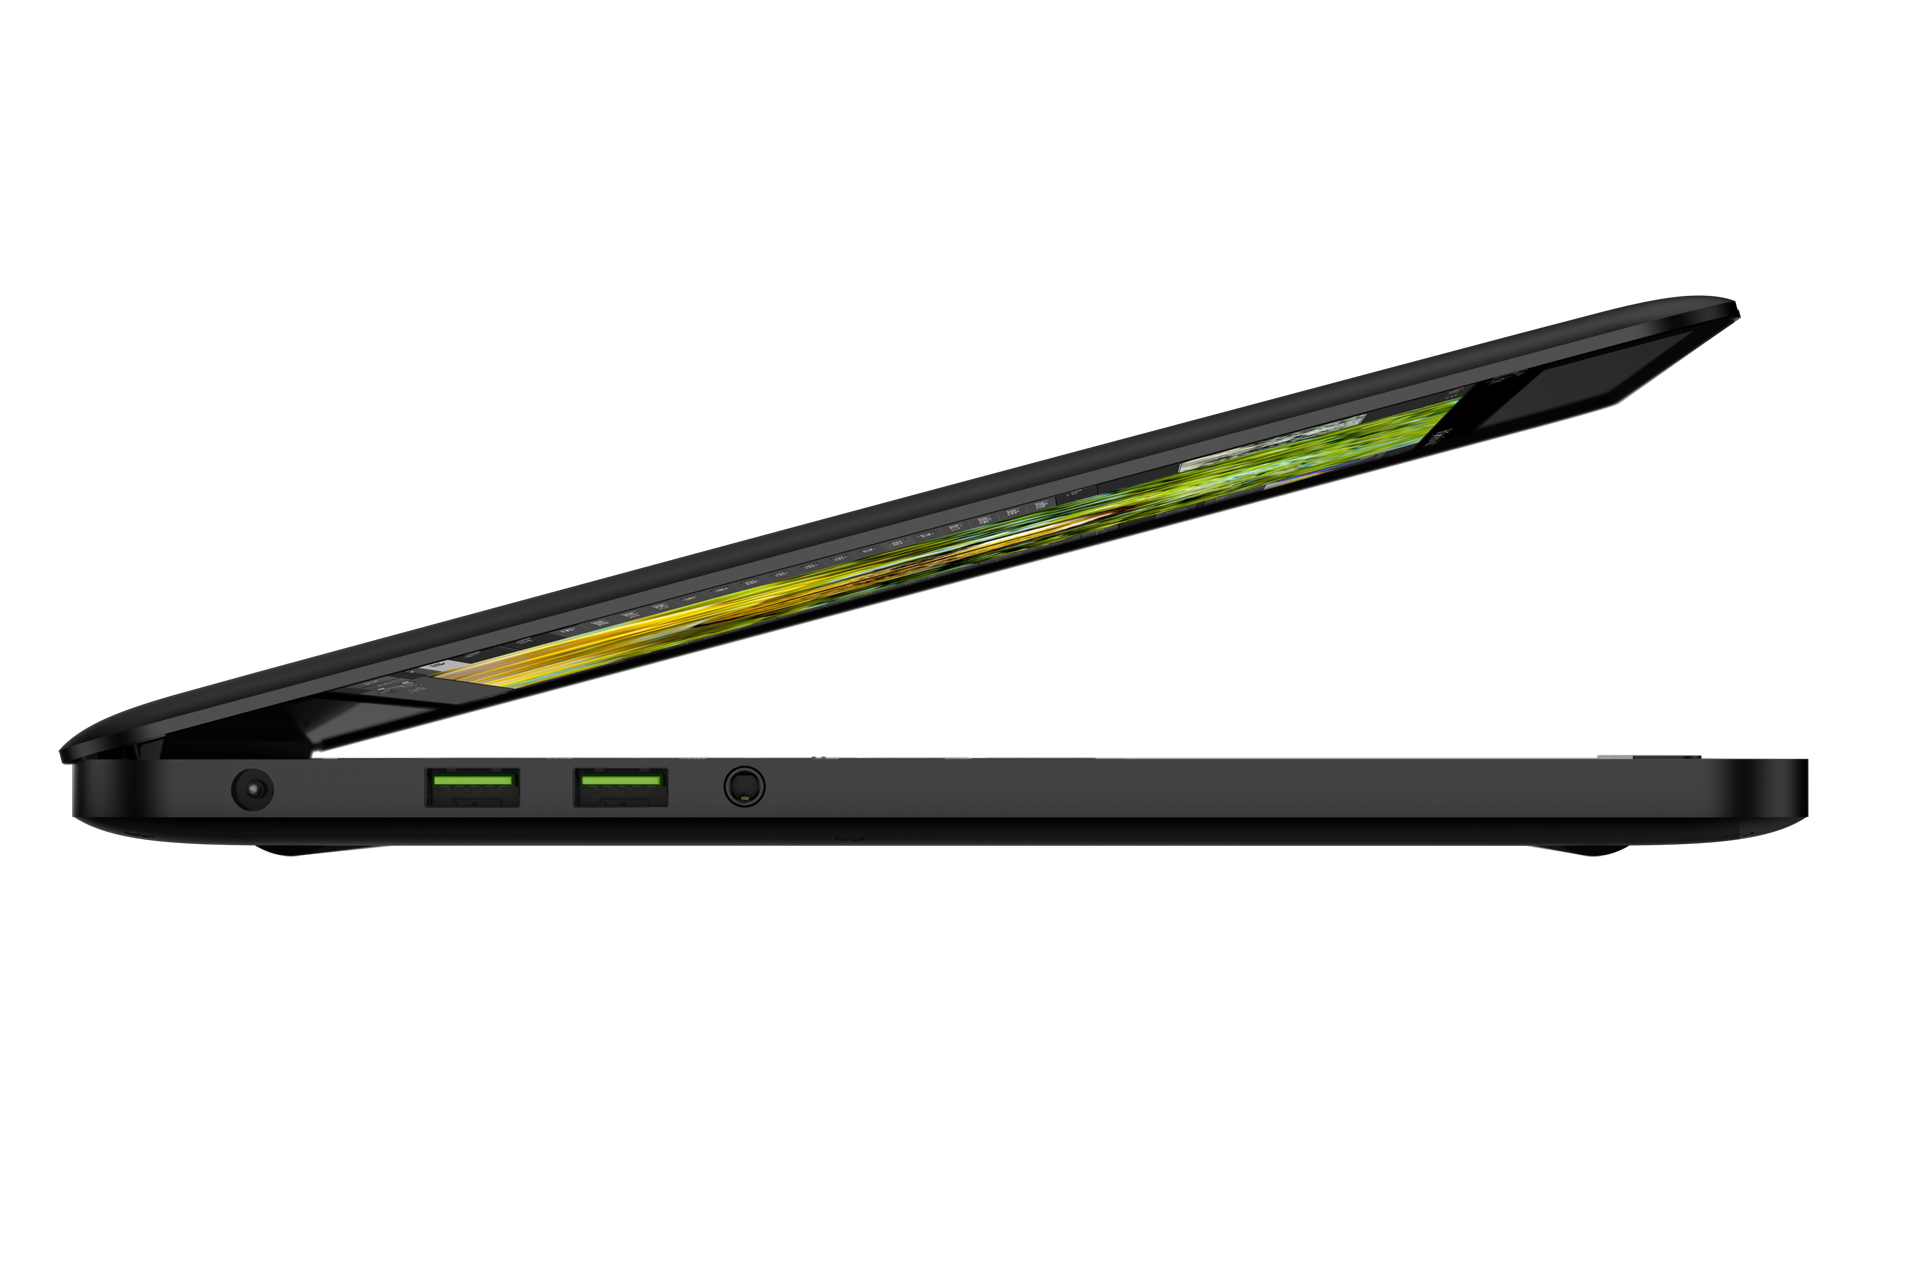 This Razer Blade 14 Black Friday gaming laptop deal for $1,799 is